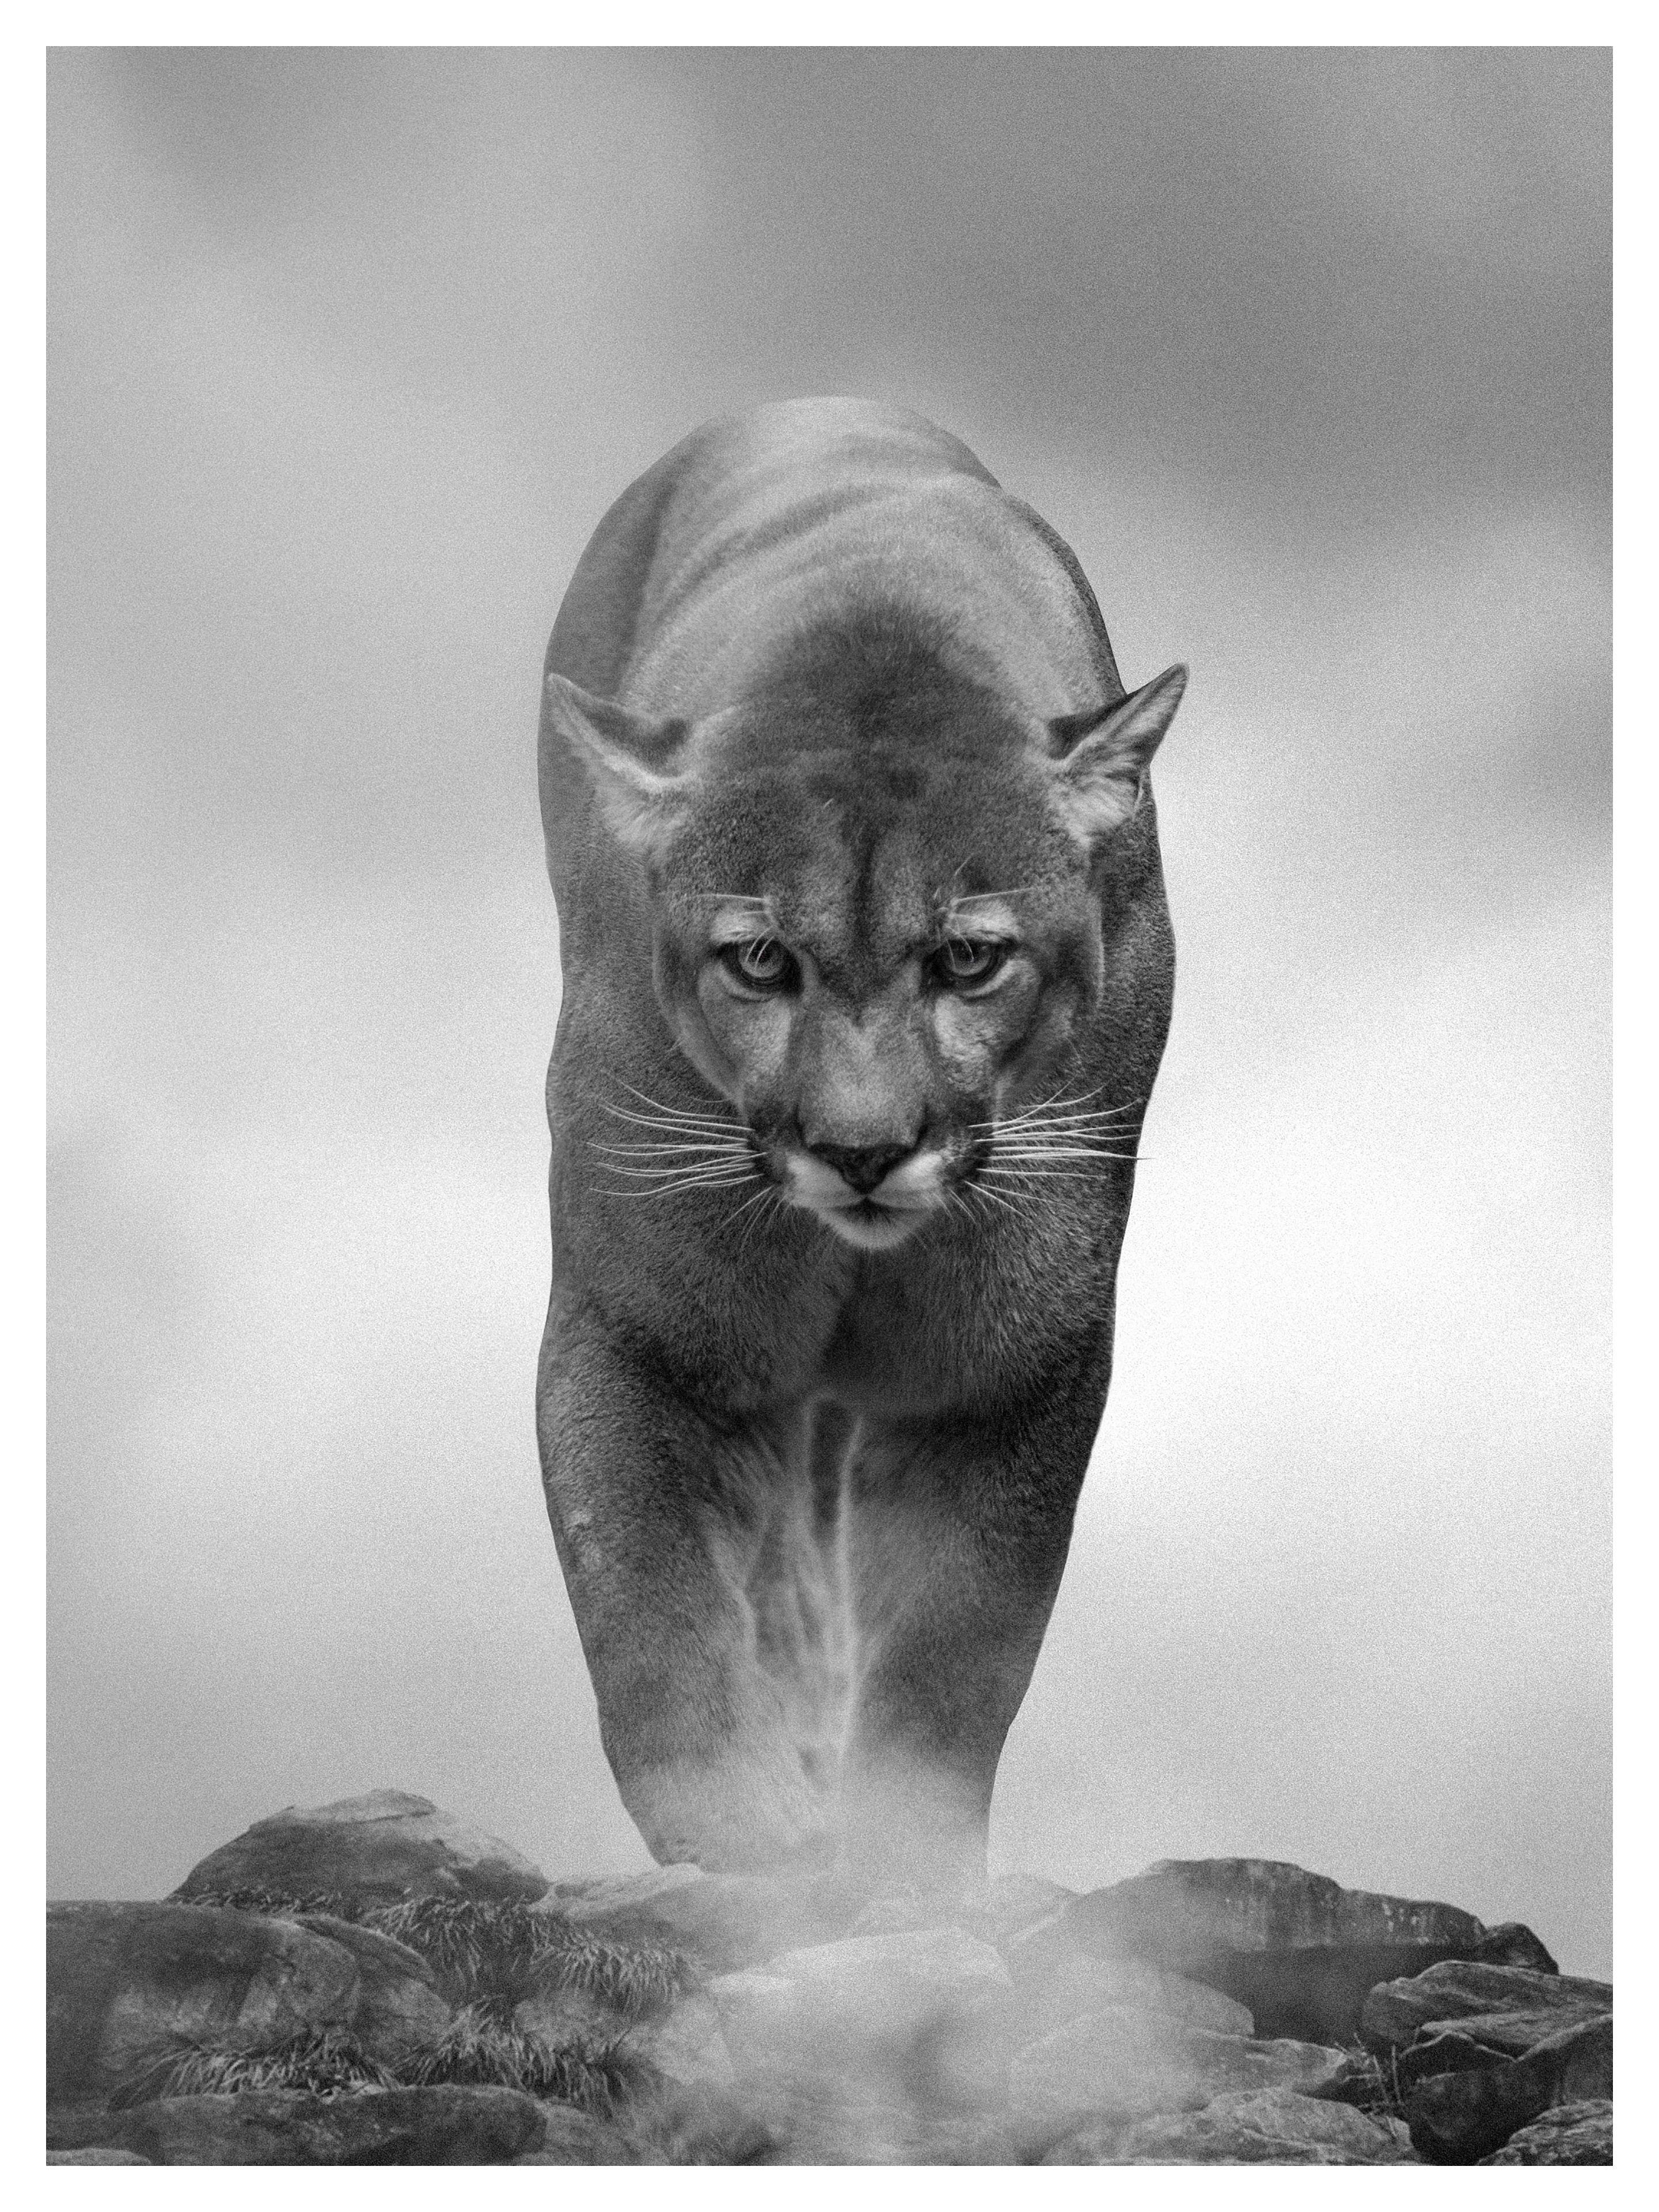 Shane Russeck Black and White Photograph - King of the Mountain 40x60  Black & White Photography, Cougar, Mountain Lion 